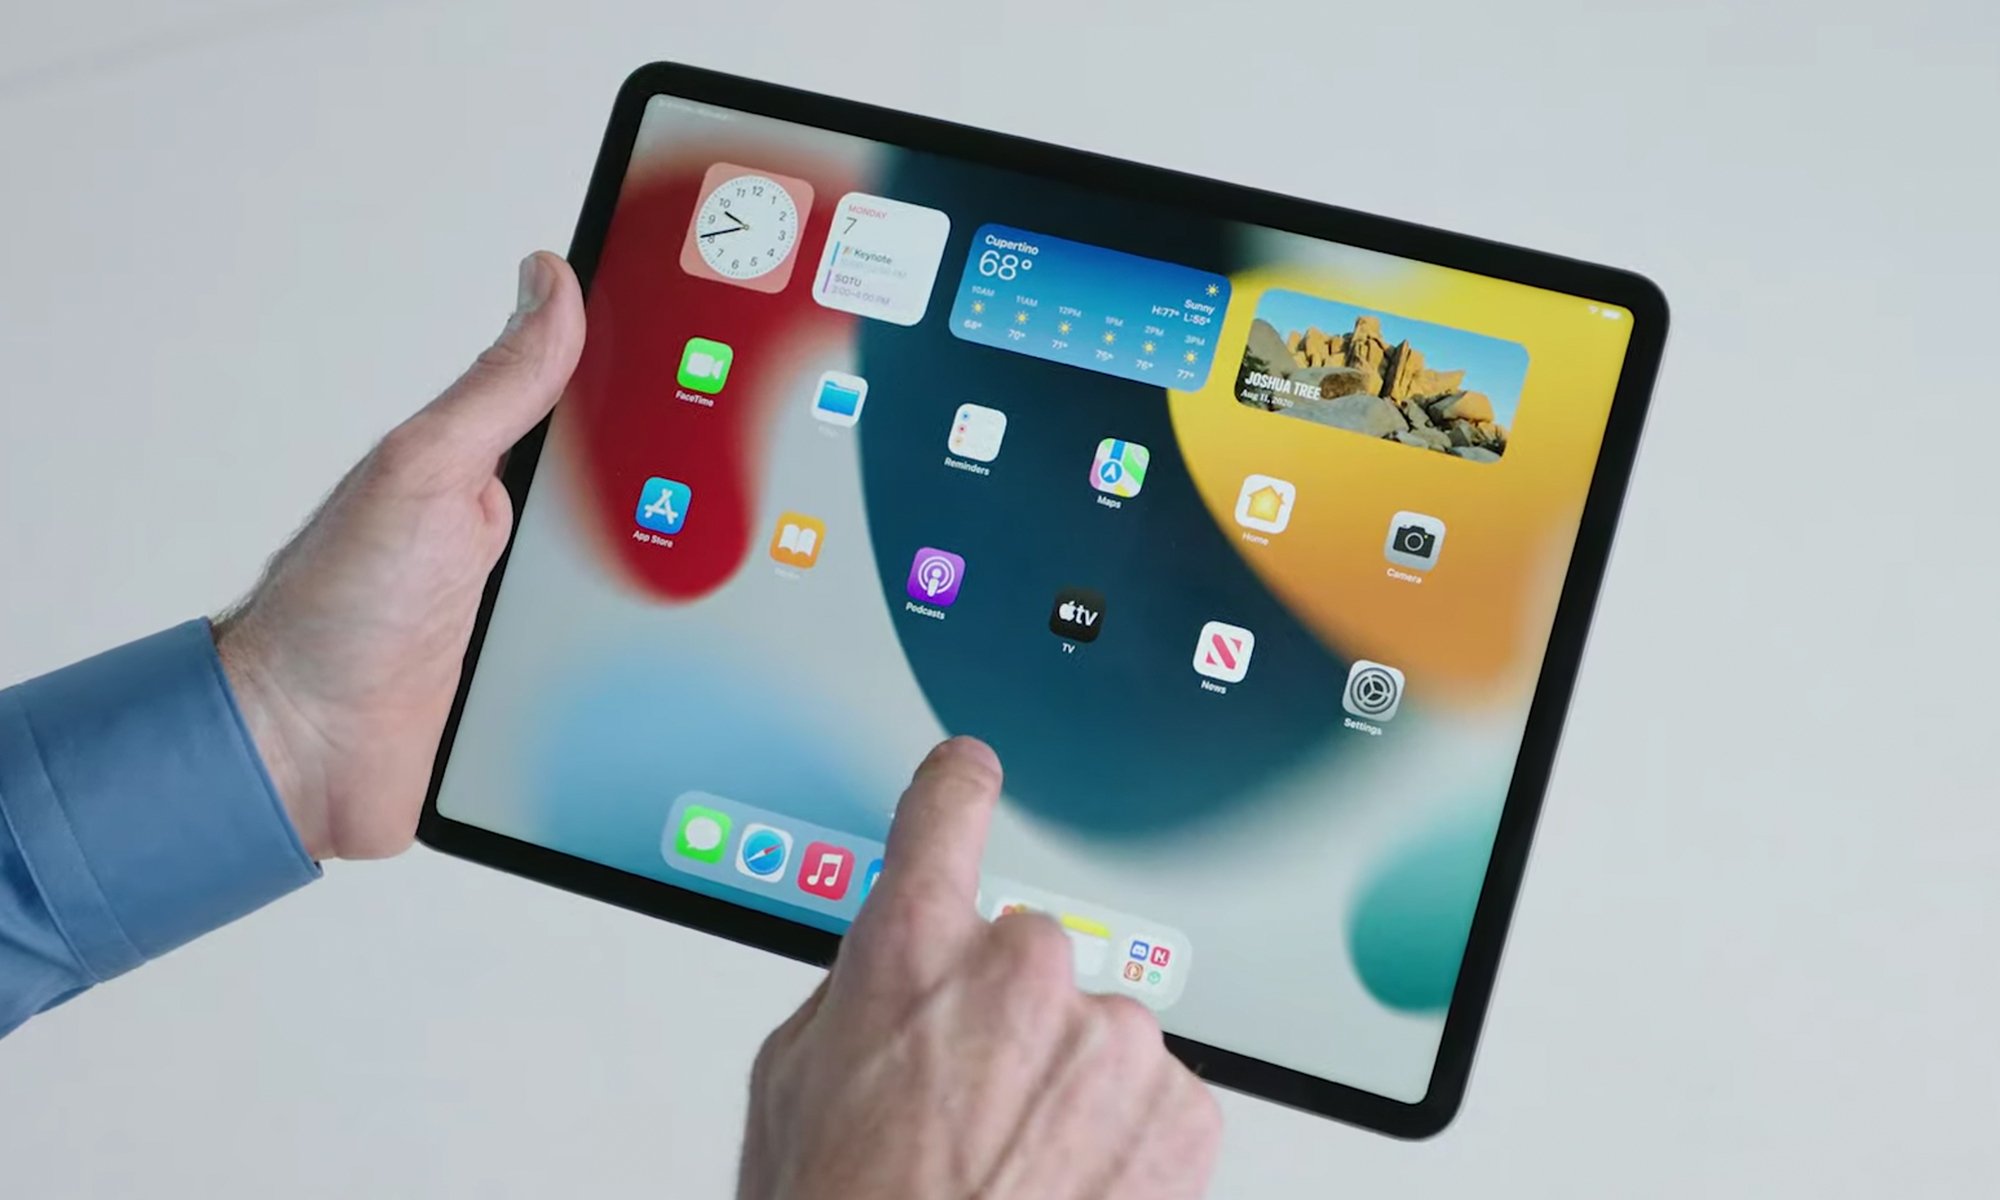 iPadOS 15 features widgets on the home screen and better multitasking